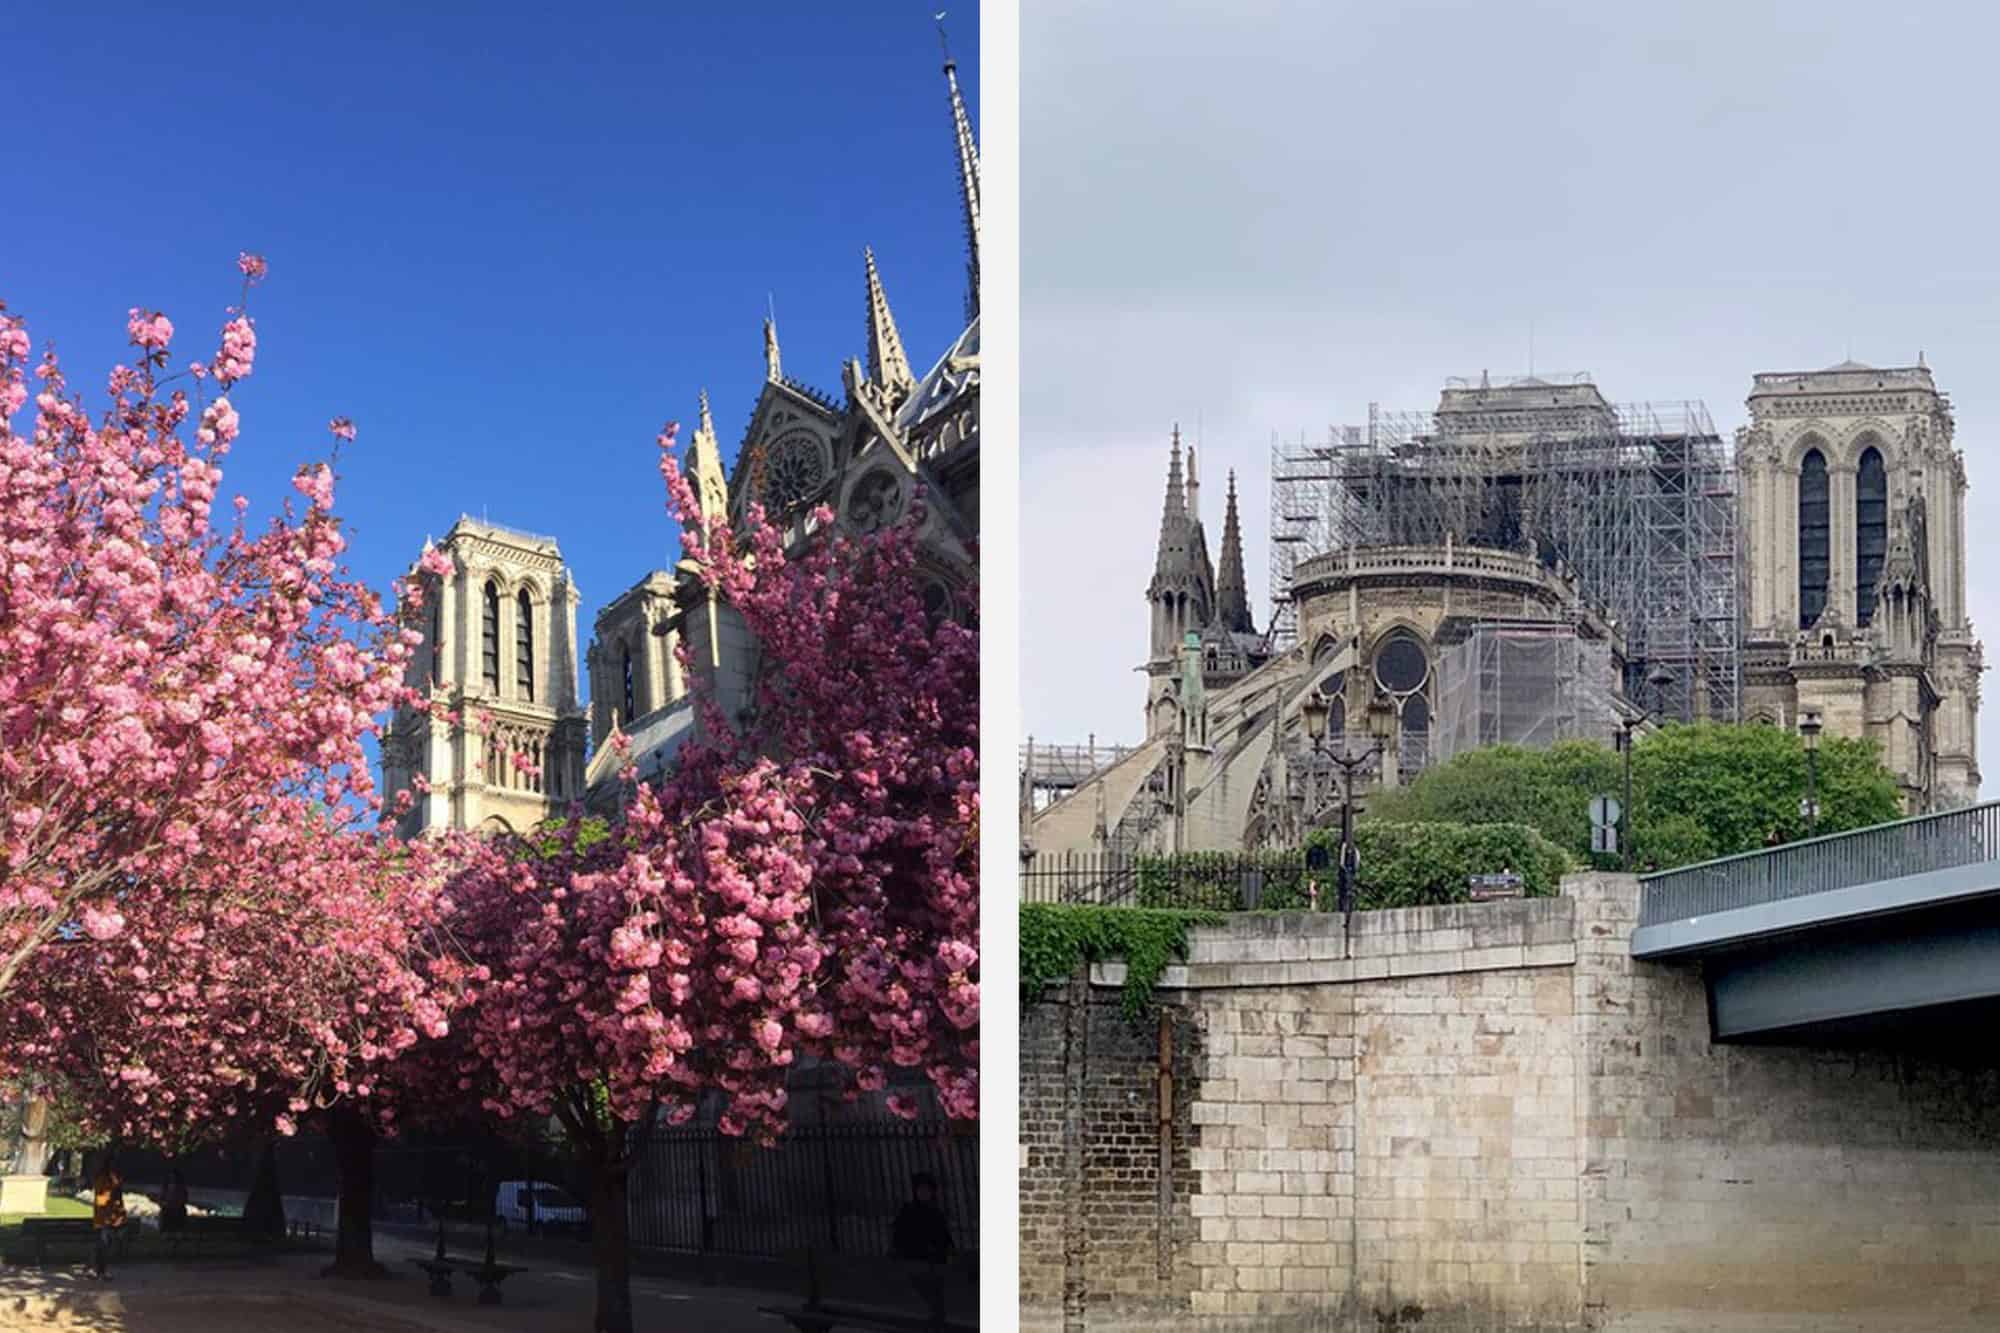 Notre Dame Cathedral in Paris, surrounded by flowering pink cherry blossom before the fire (left). Notre Dame after the terrible fire in Paris in April 2019 (right).